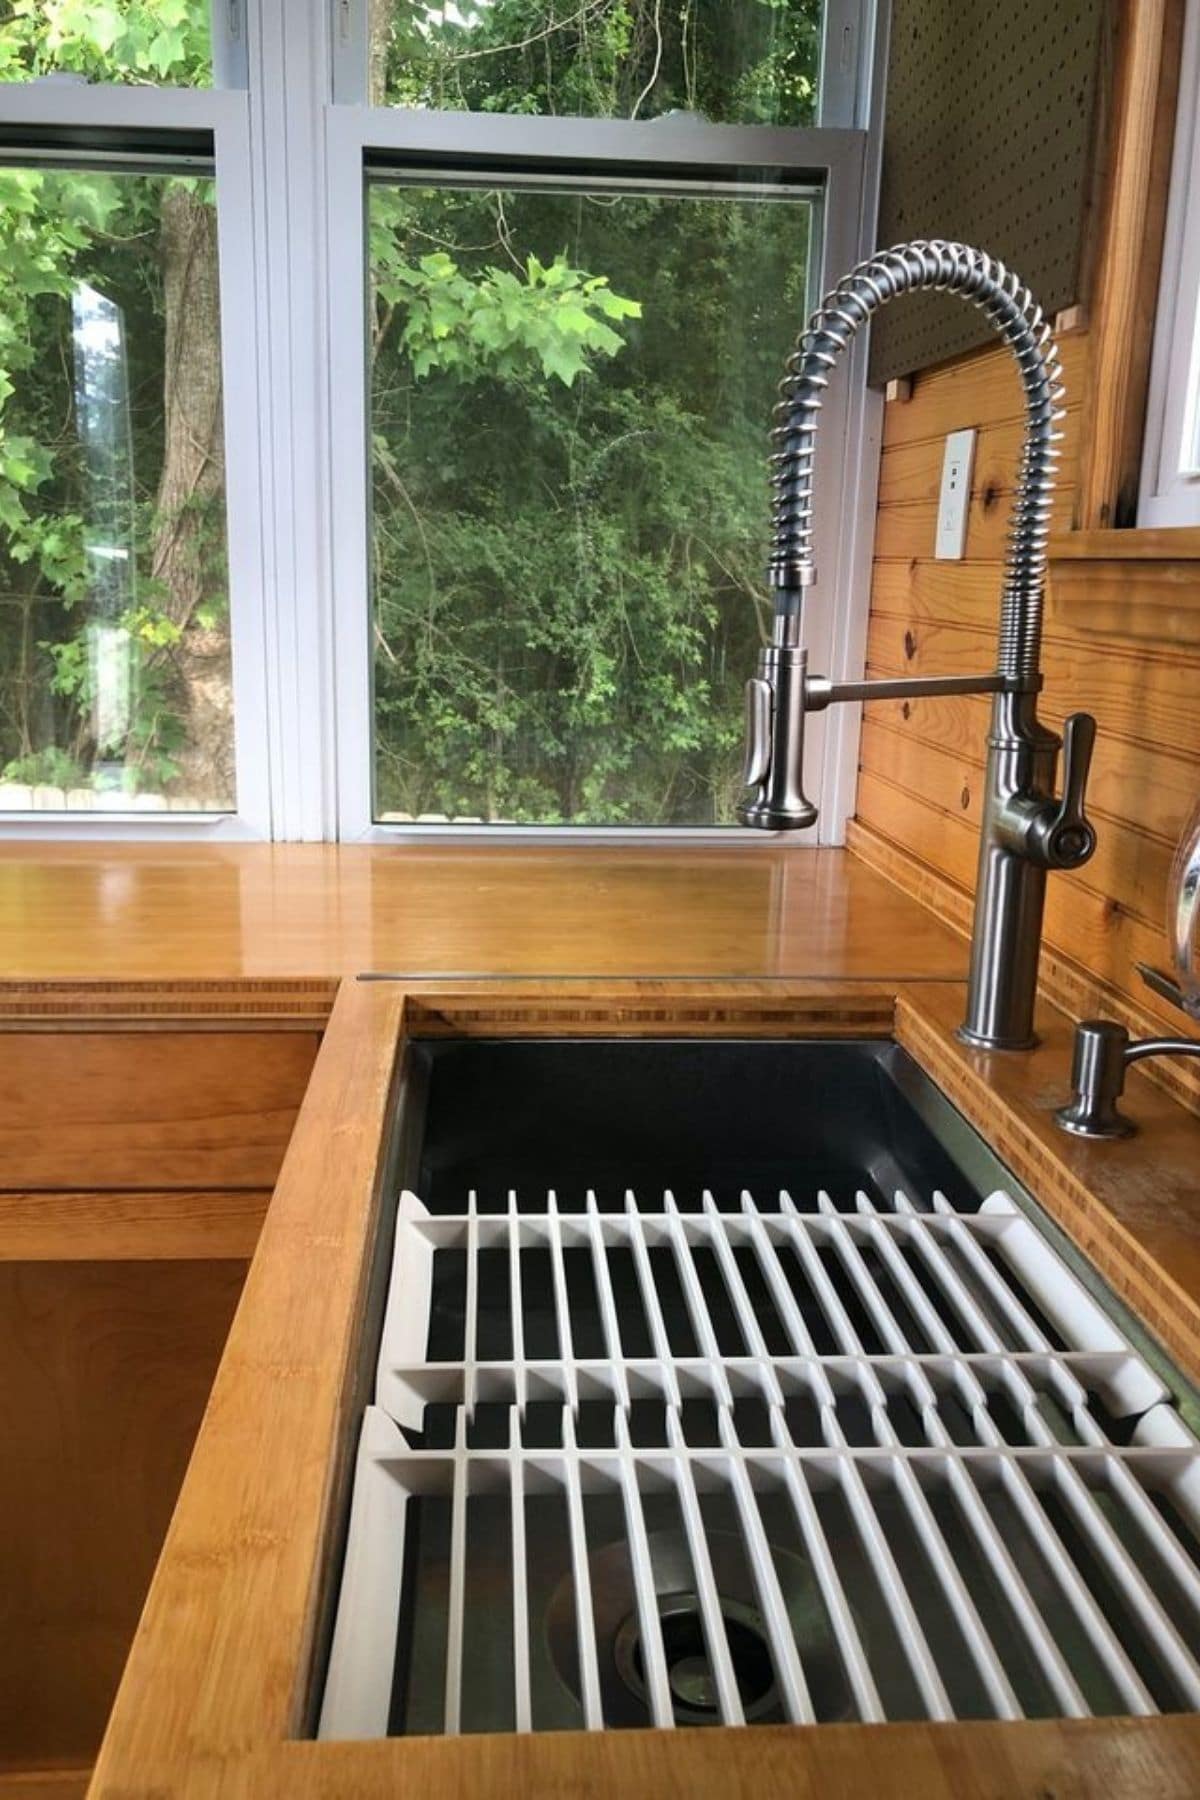 Deep sink with dish drain insert in butcher block counter